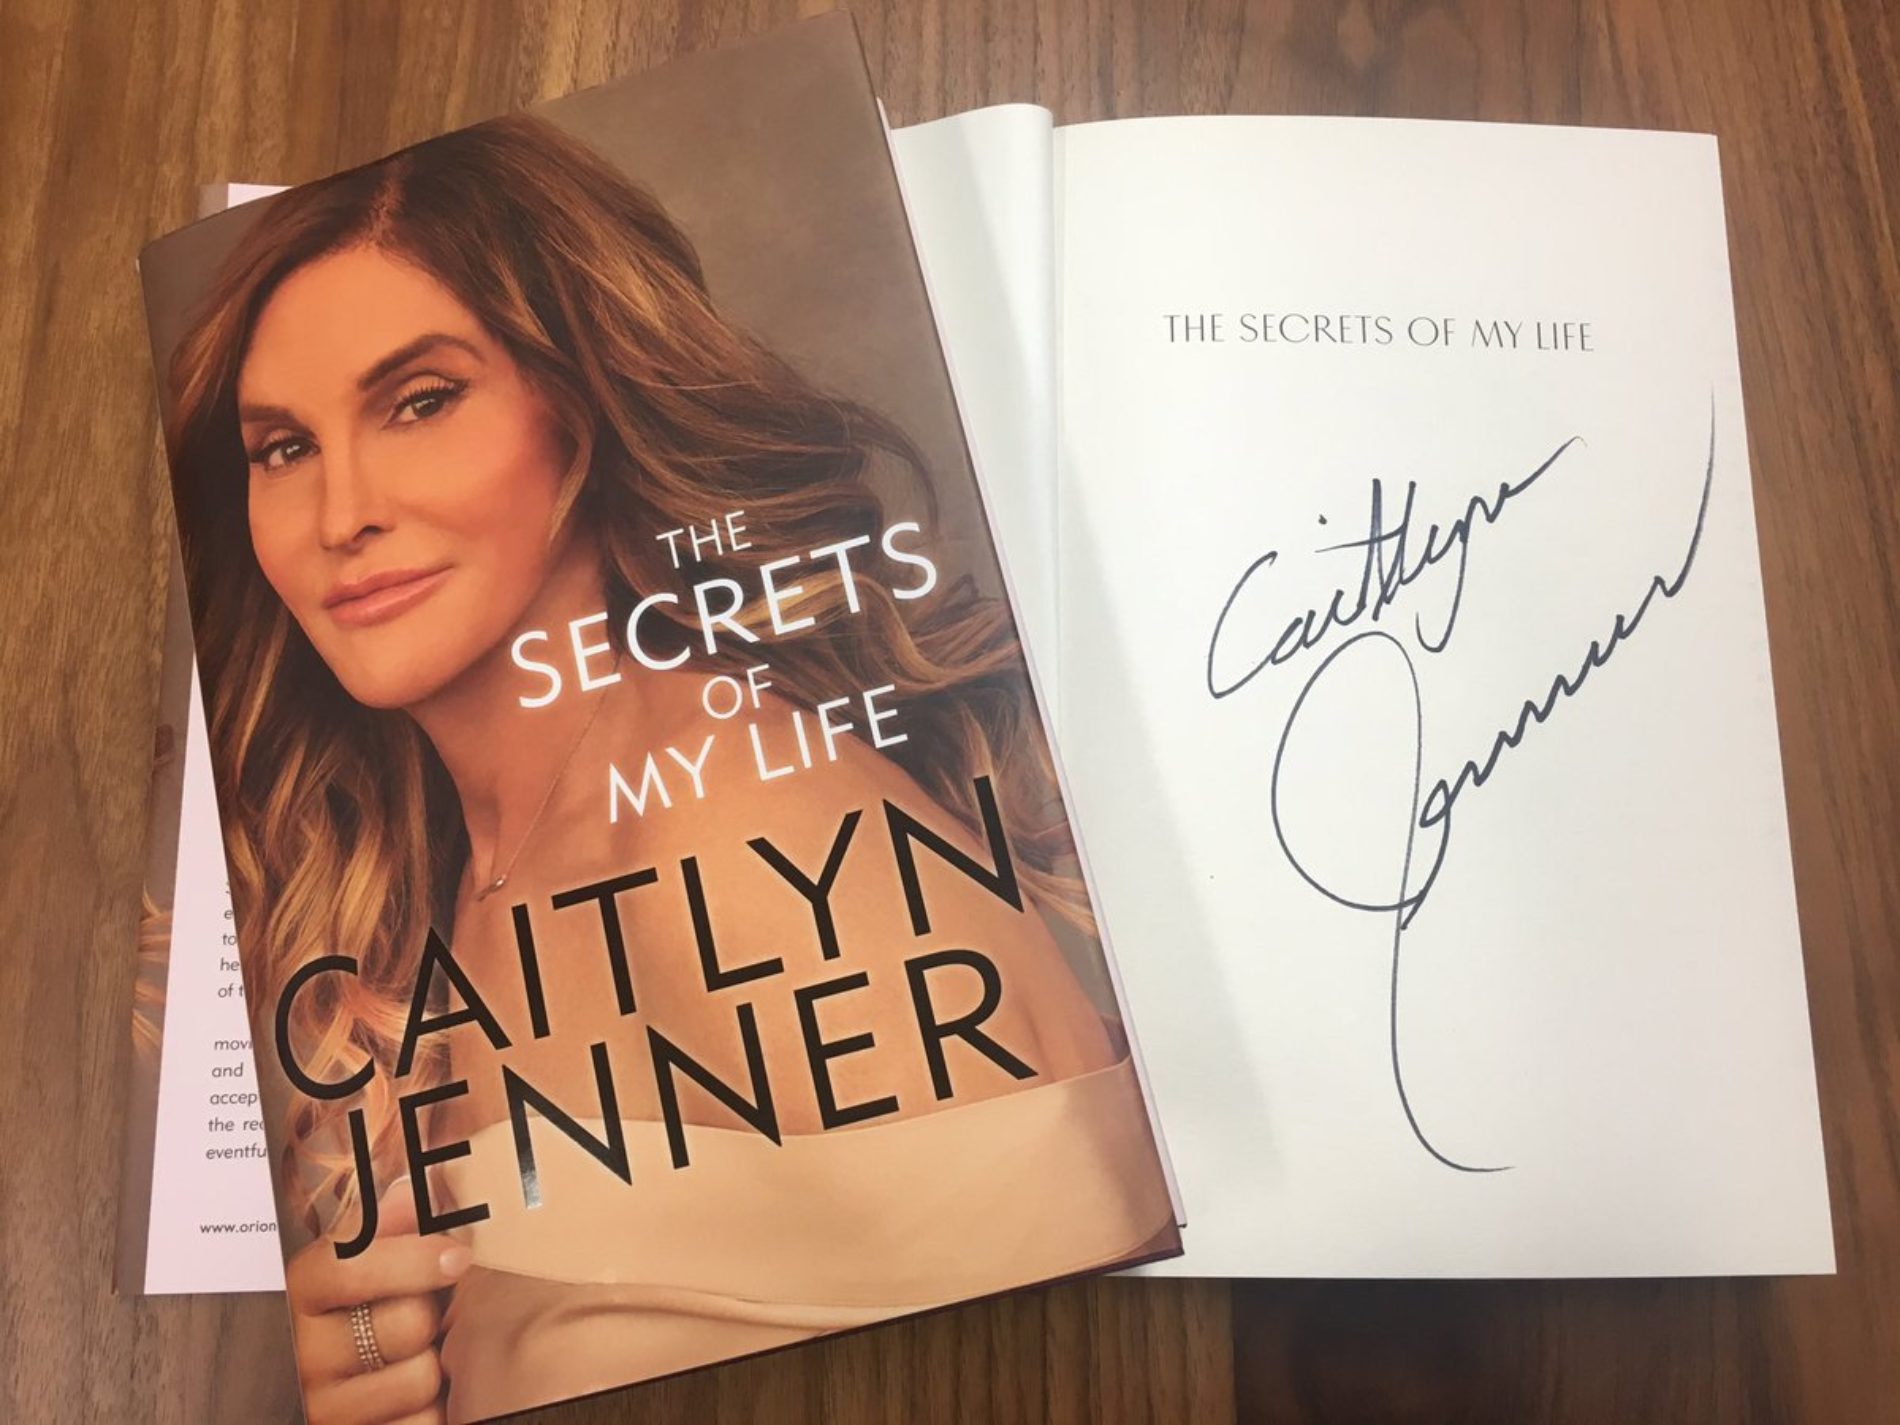 For those who actively seek God from the LGBT community, Caitlyn Jenner has this to say